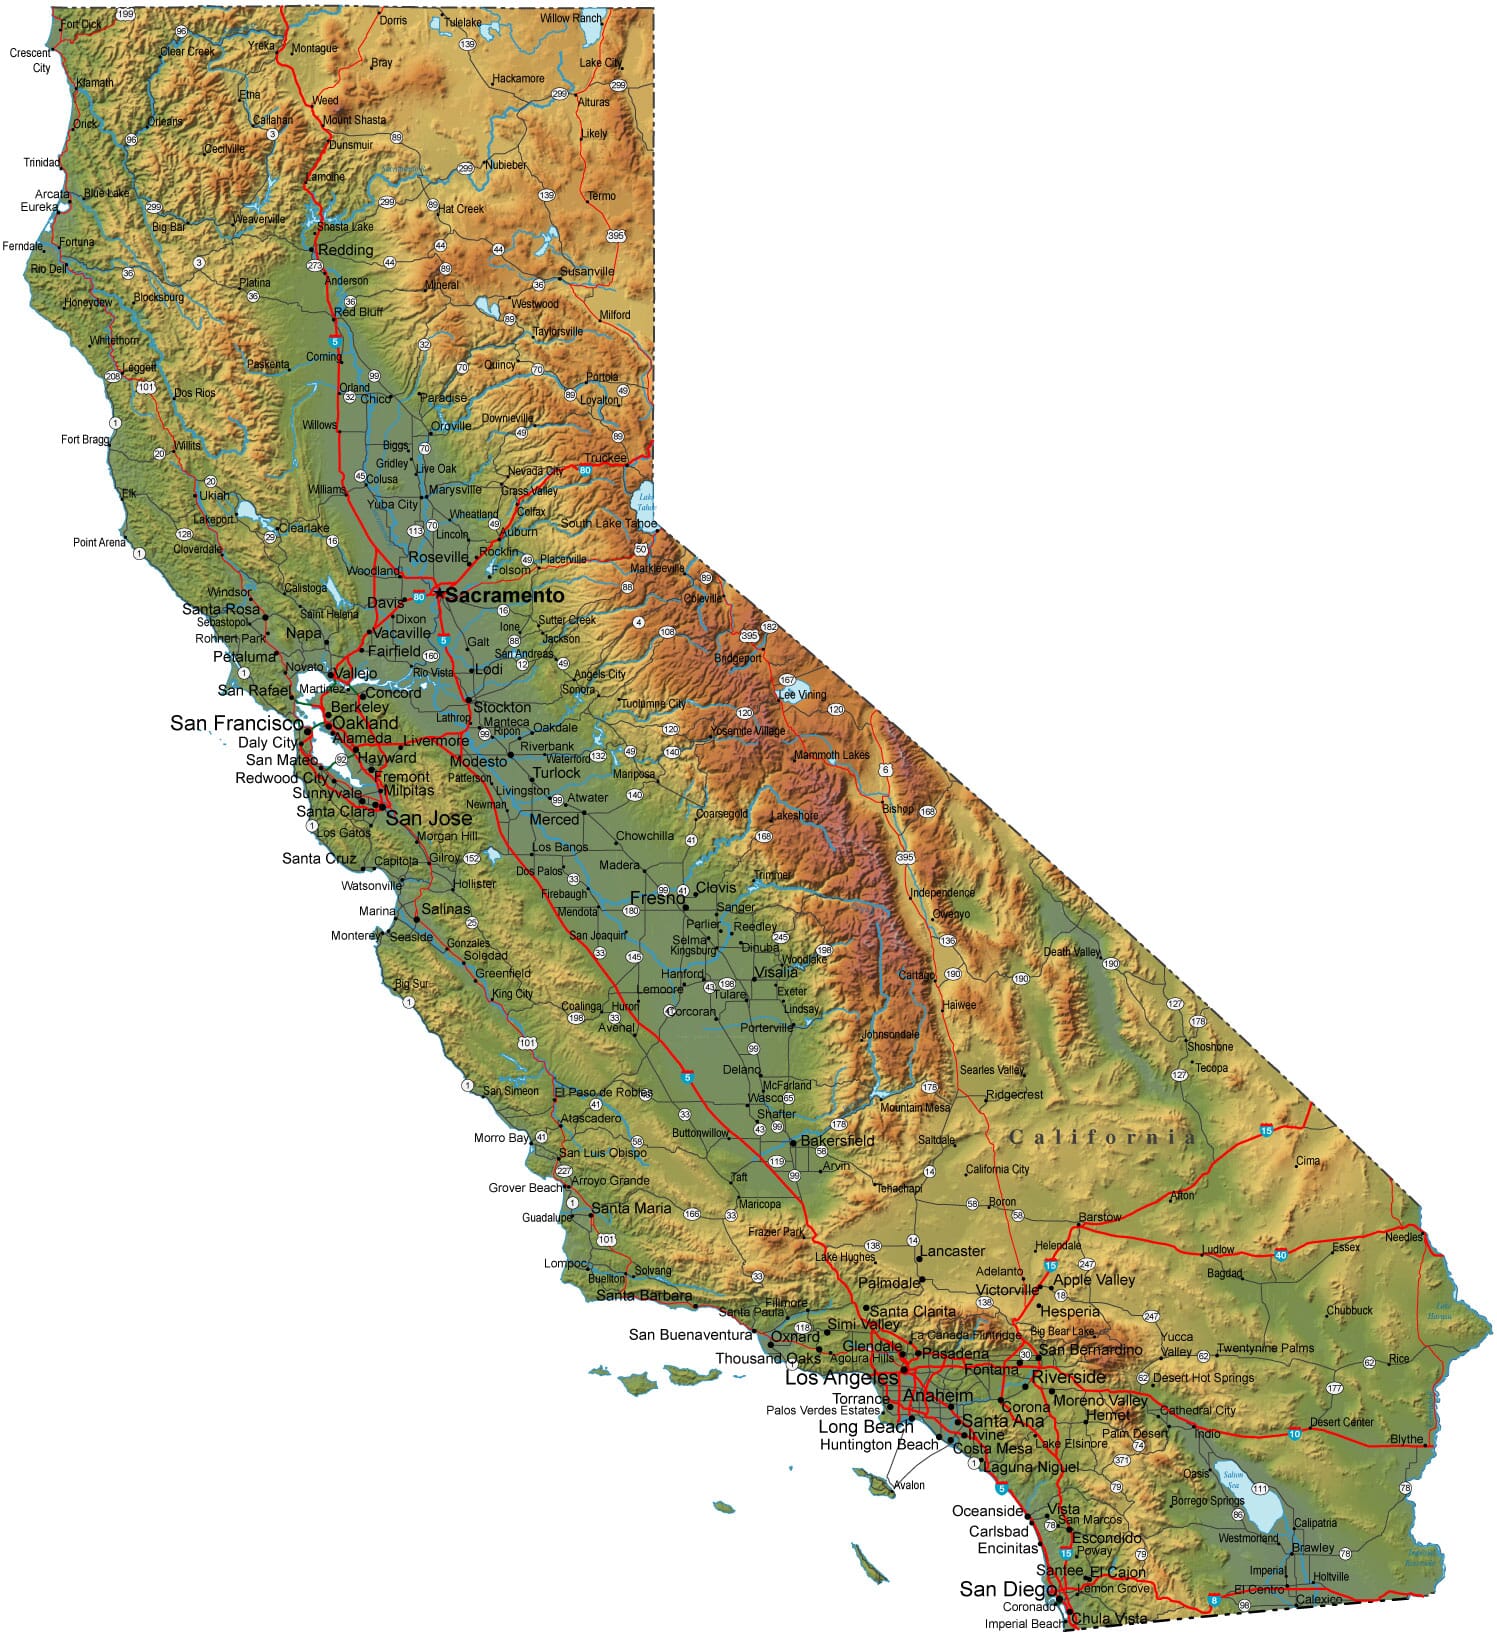 california on a map